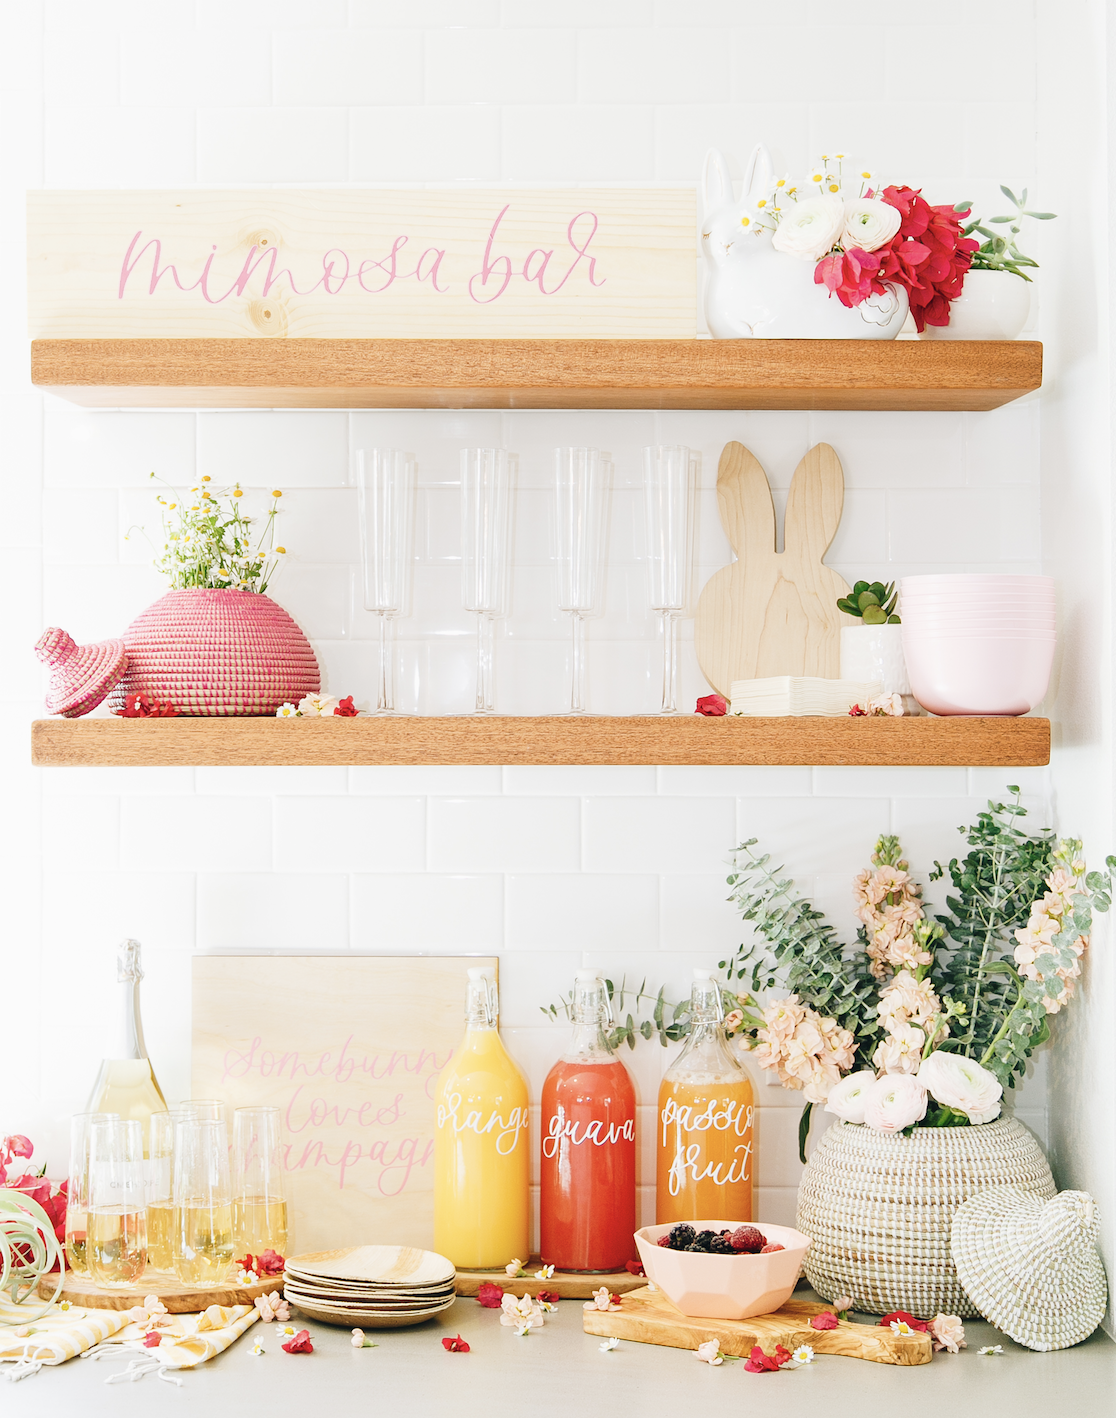 Amaze your Guests with a Bright & Cheery Mimosa Bar this Easter